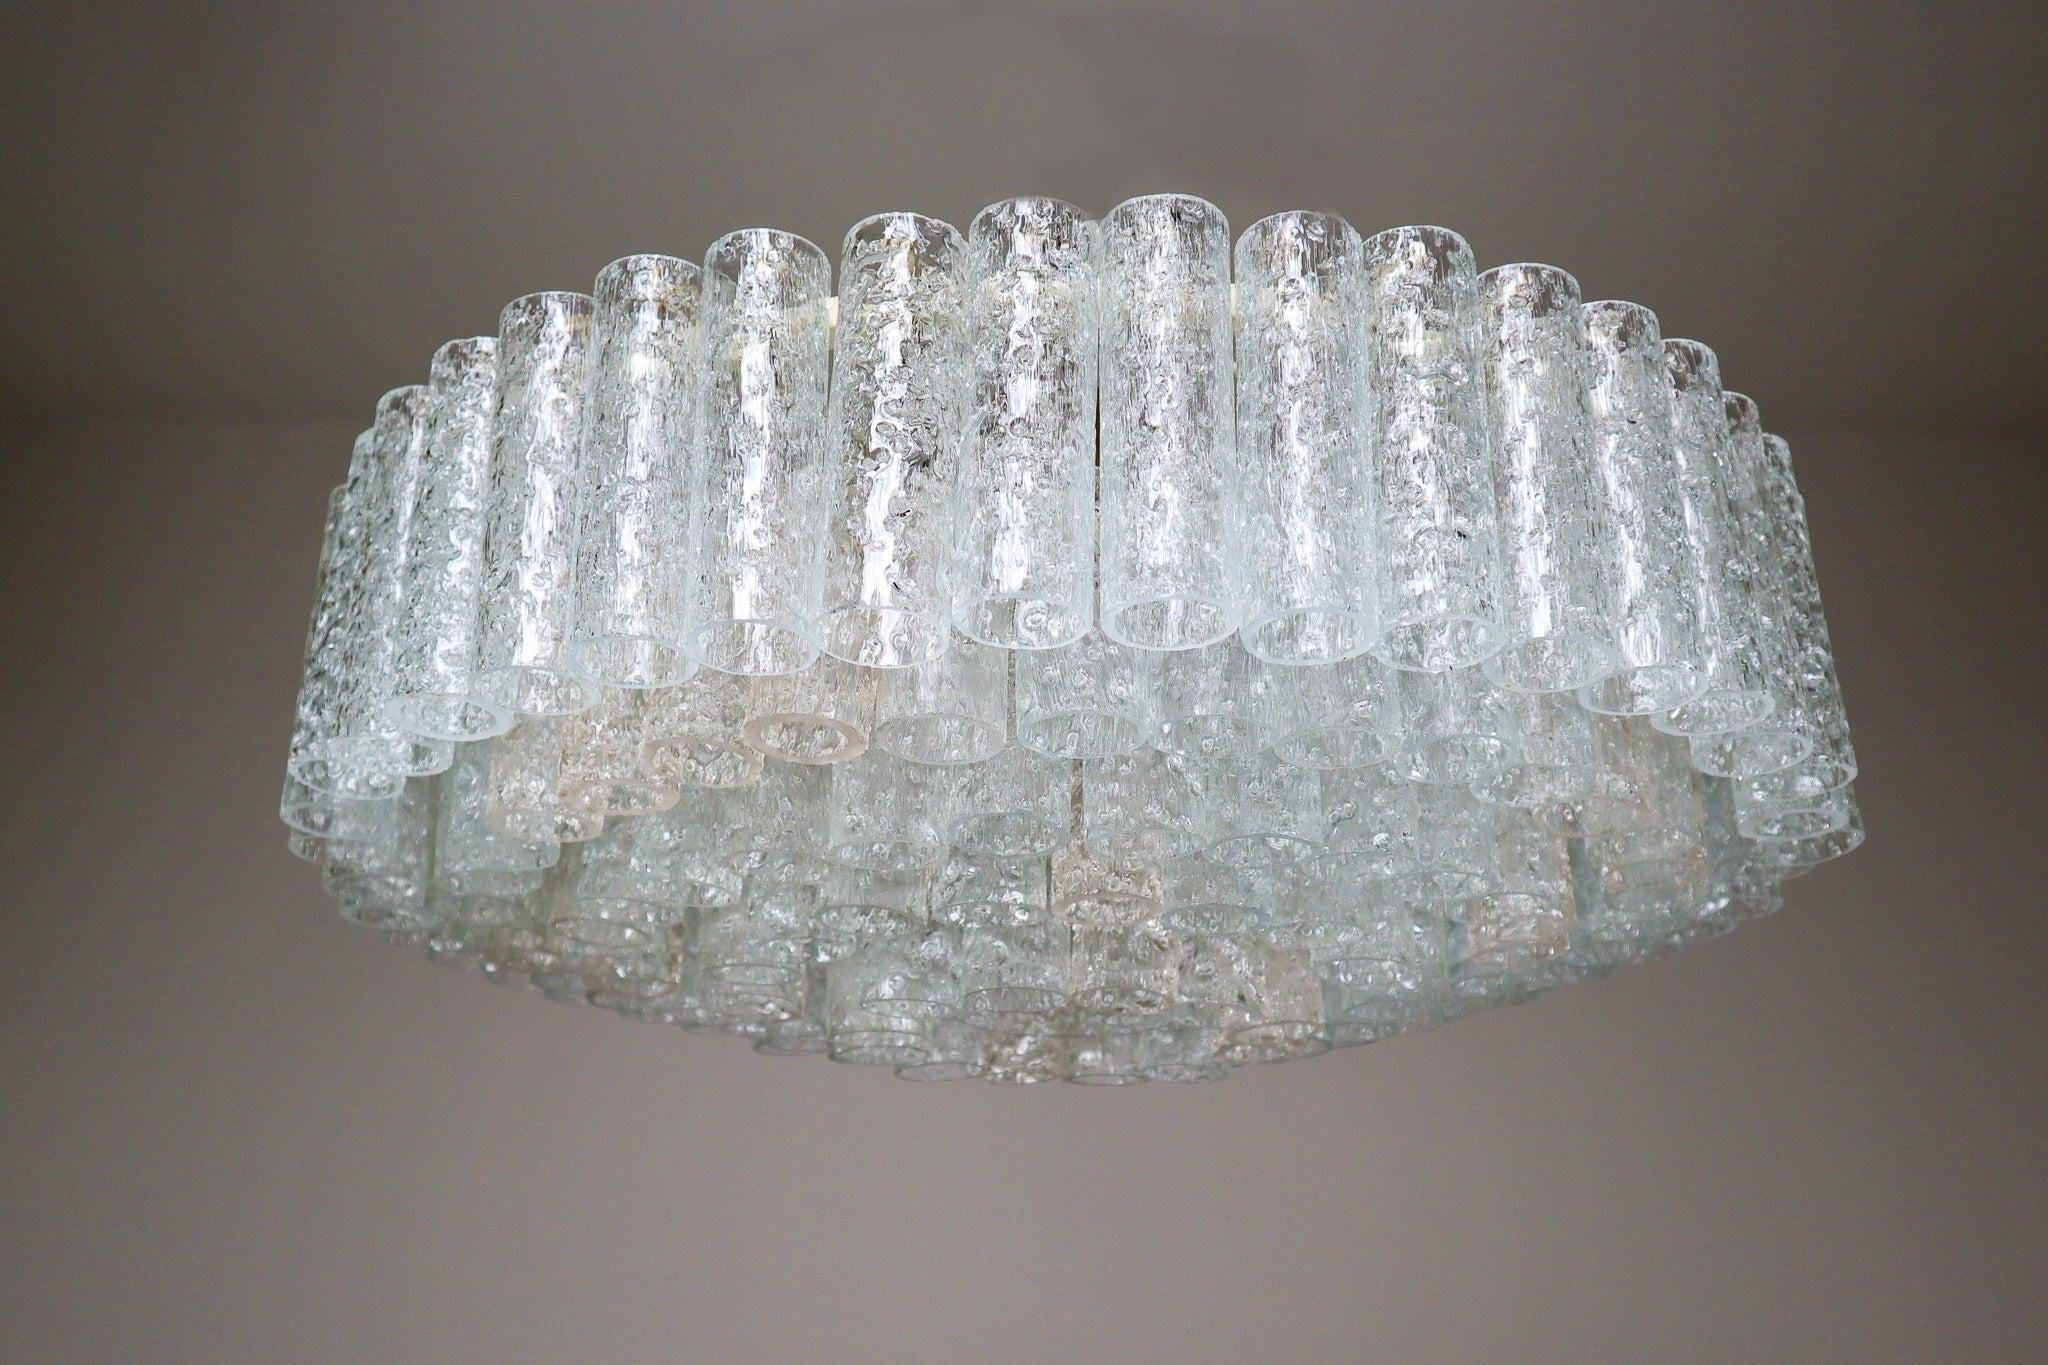 Large 1950s midcentury chandelier was designed by Doria Leuchten, Germany. It features multi-tiered layers of textured ice glass tubes connected to a circular brushed brass frame. The flush mount with 140 glass tubes requires twelve E14 bulbs (40